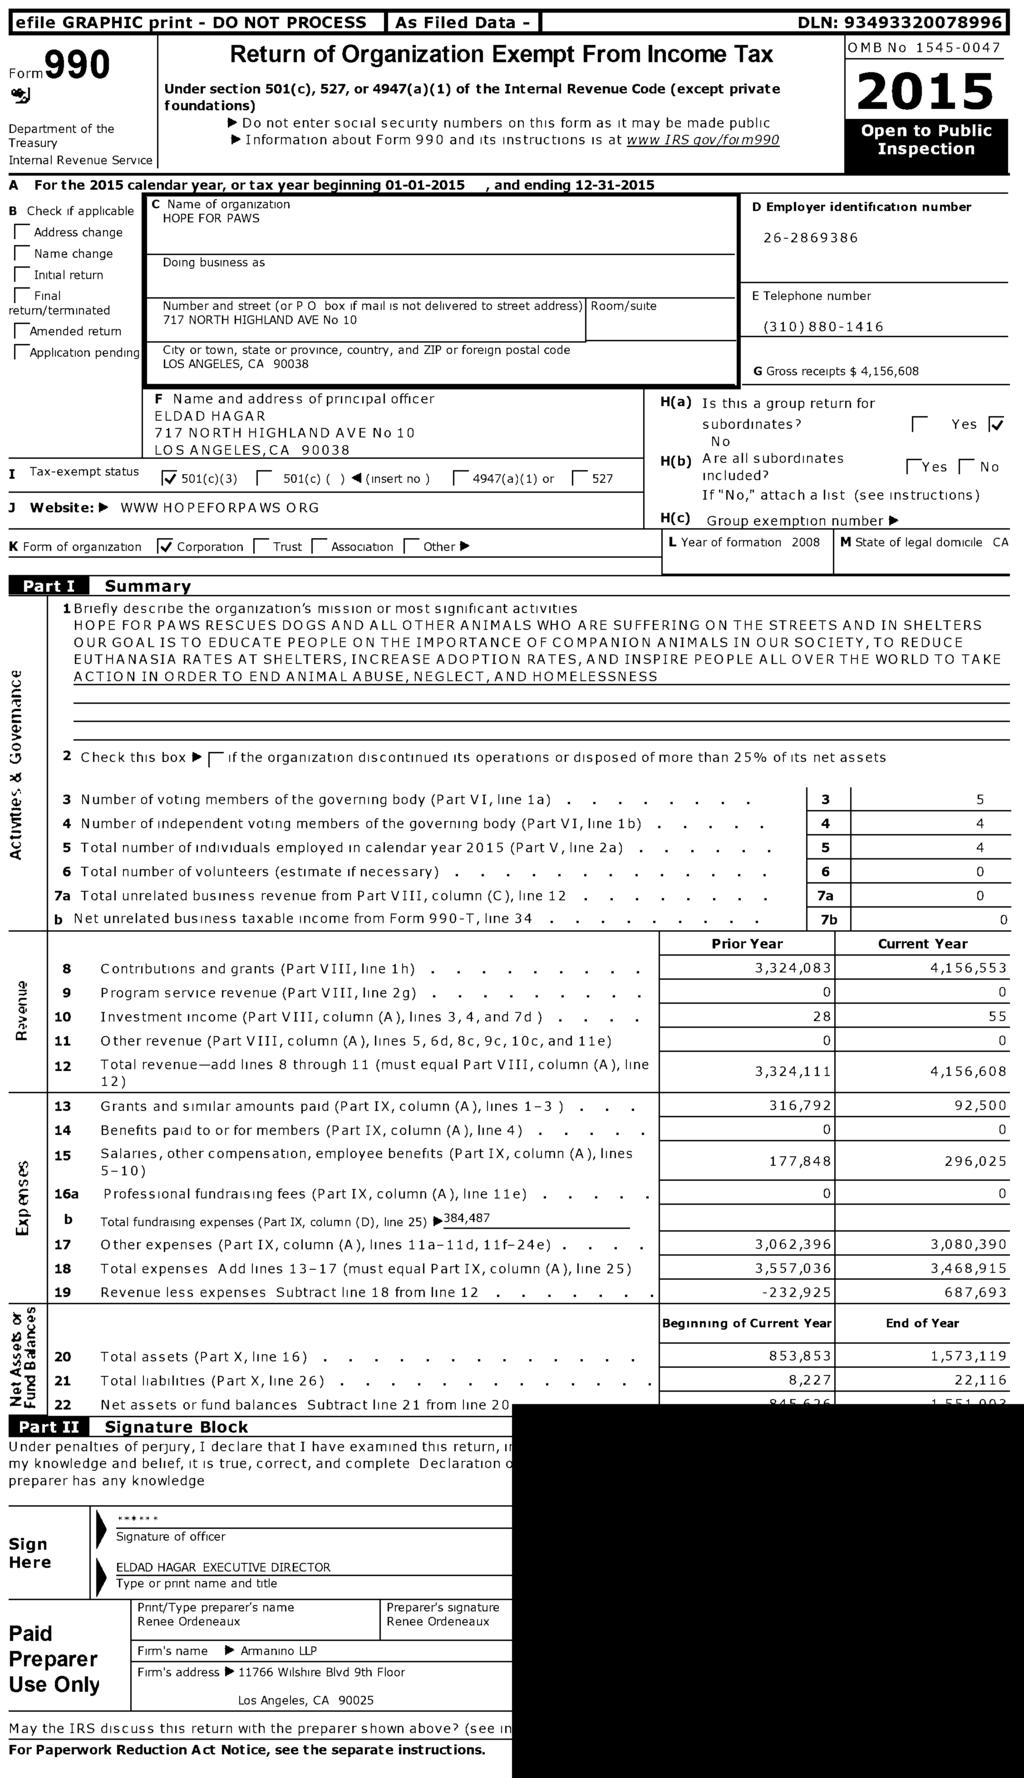 l efile GRAPHIC p rint - DO NOT PROCESS I As Filed Data - I DLN: 93493320078996 OMB 1545-0047 Return of Organization Exempt From Income Tax Form 990 Under section 501 ( c), 527, or 4947 ( a)(1) of